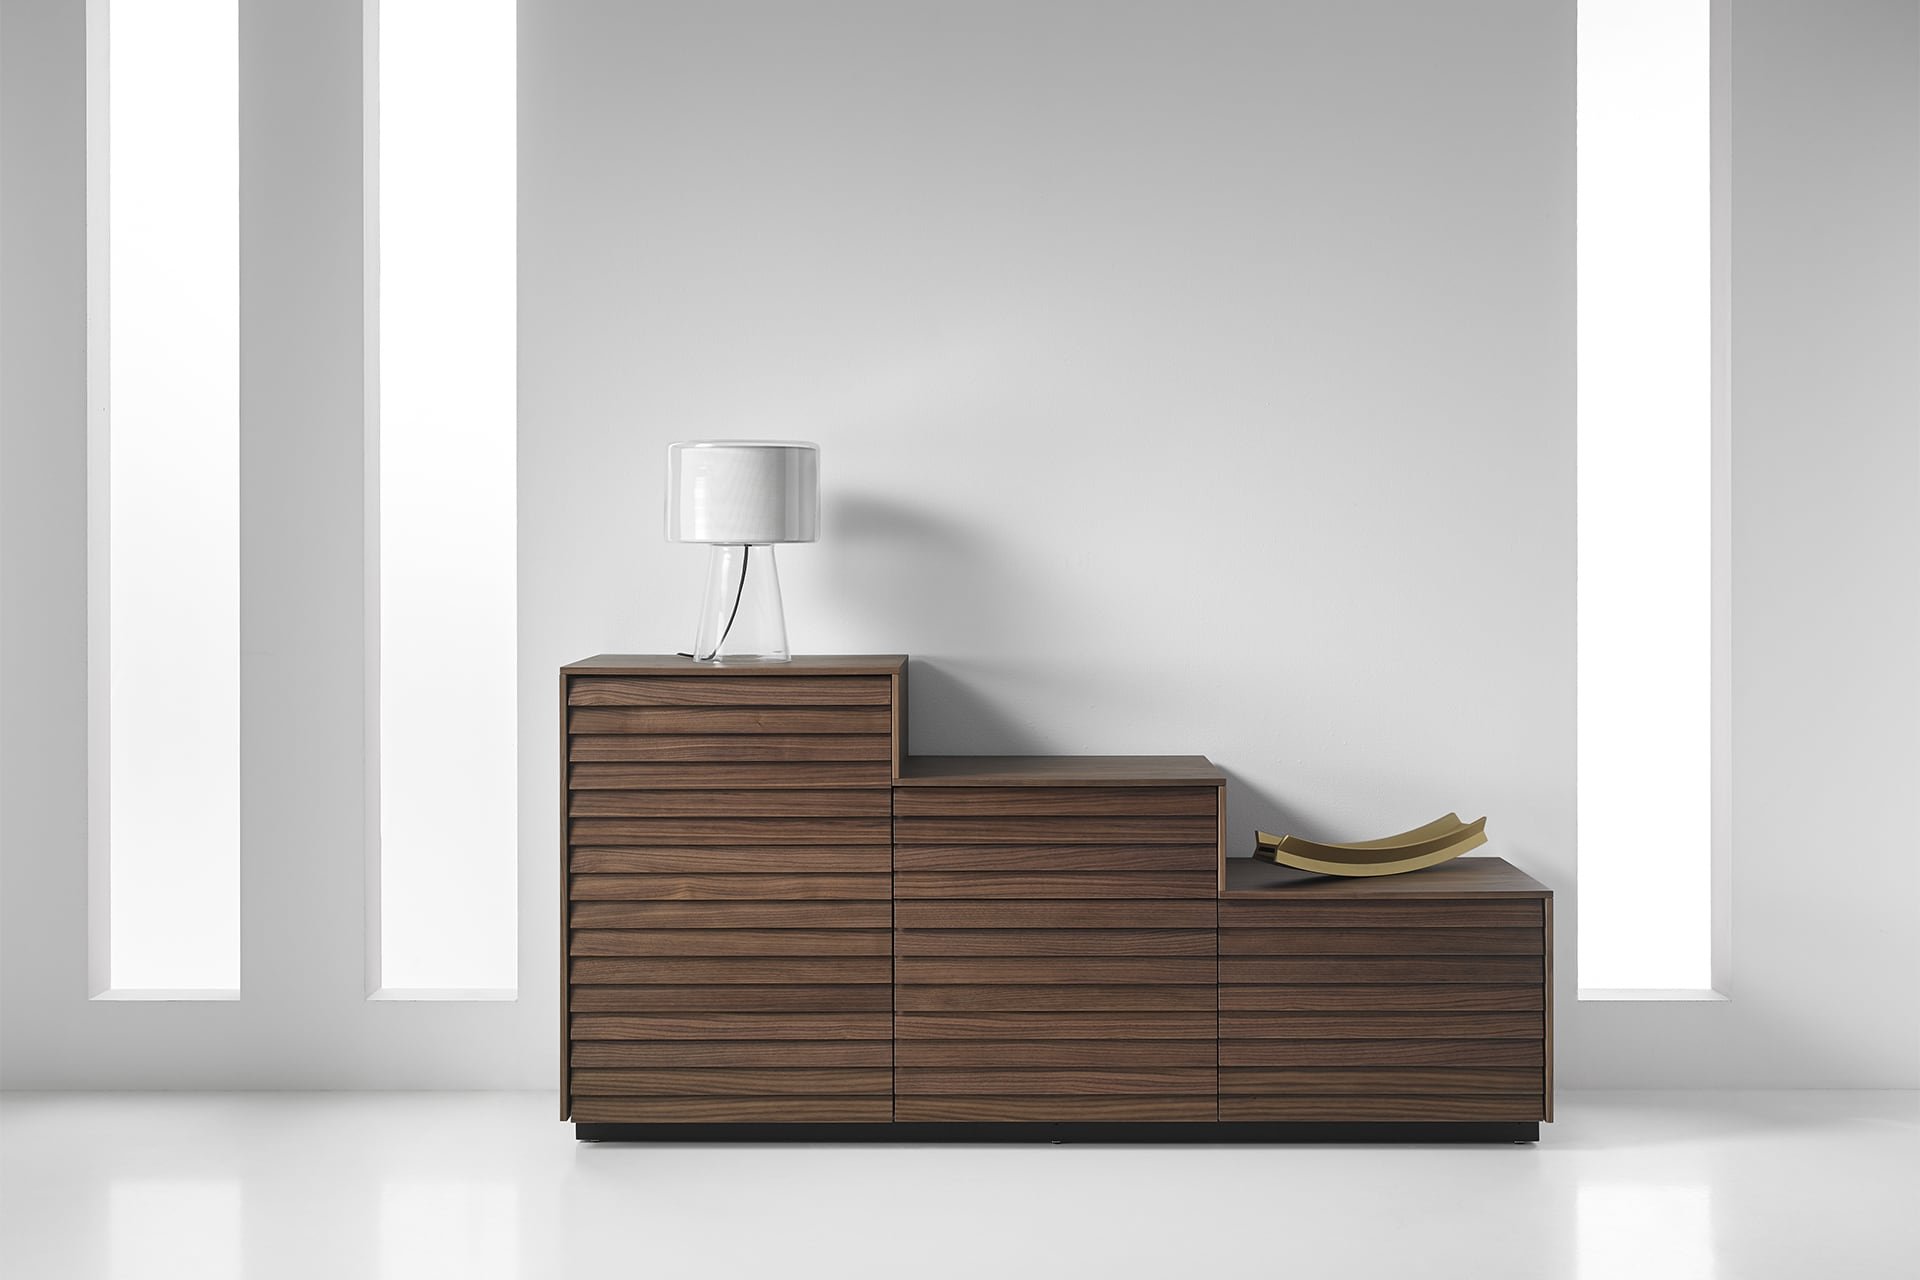 Sussex Sideboard from Punt Mobles, designed by Terence Woodgate